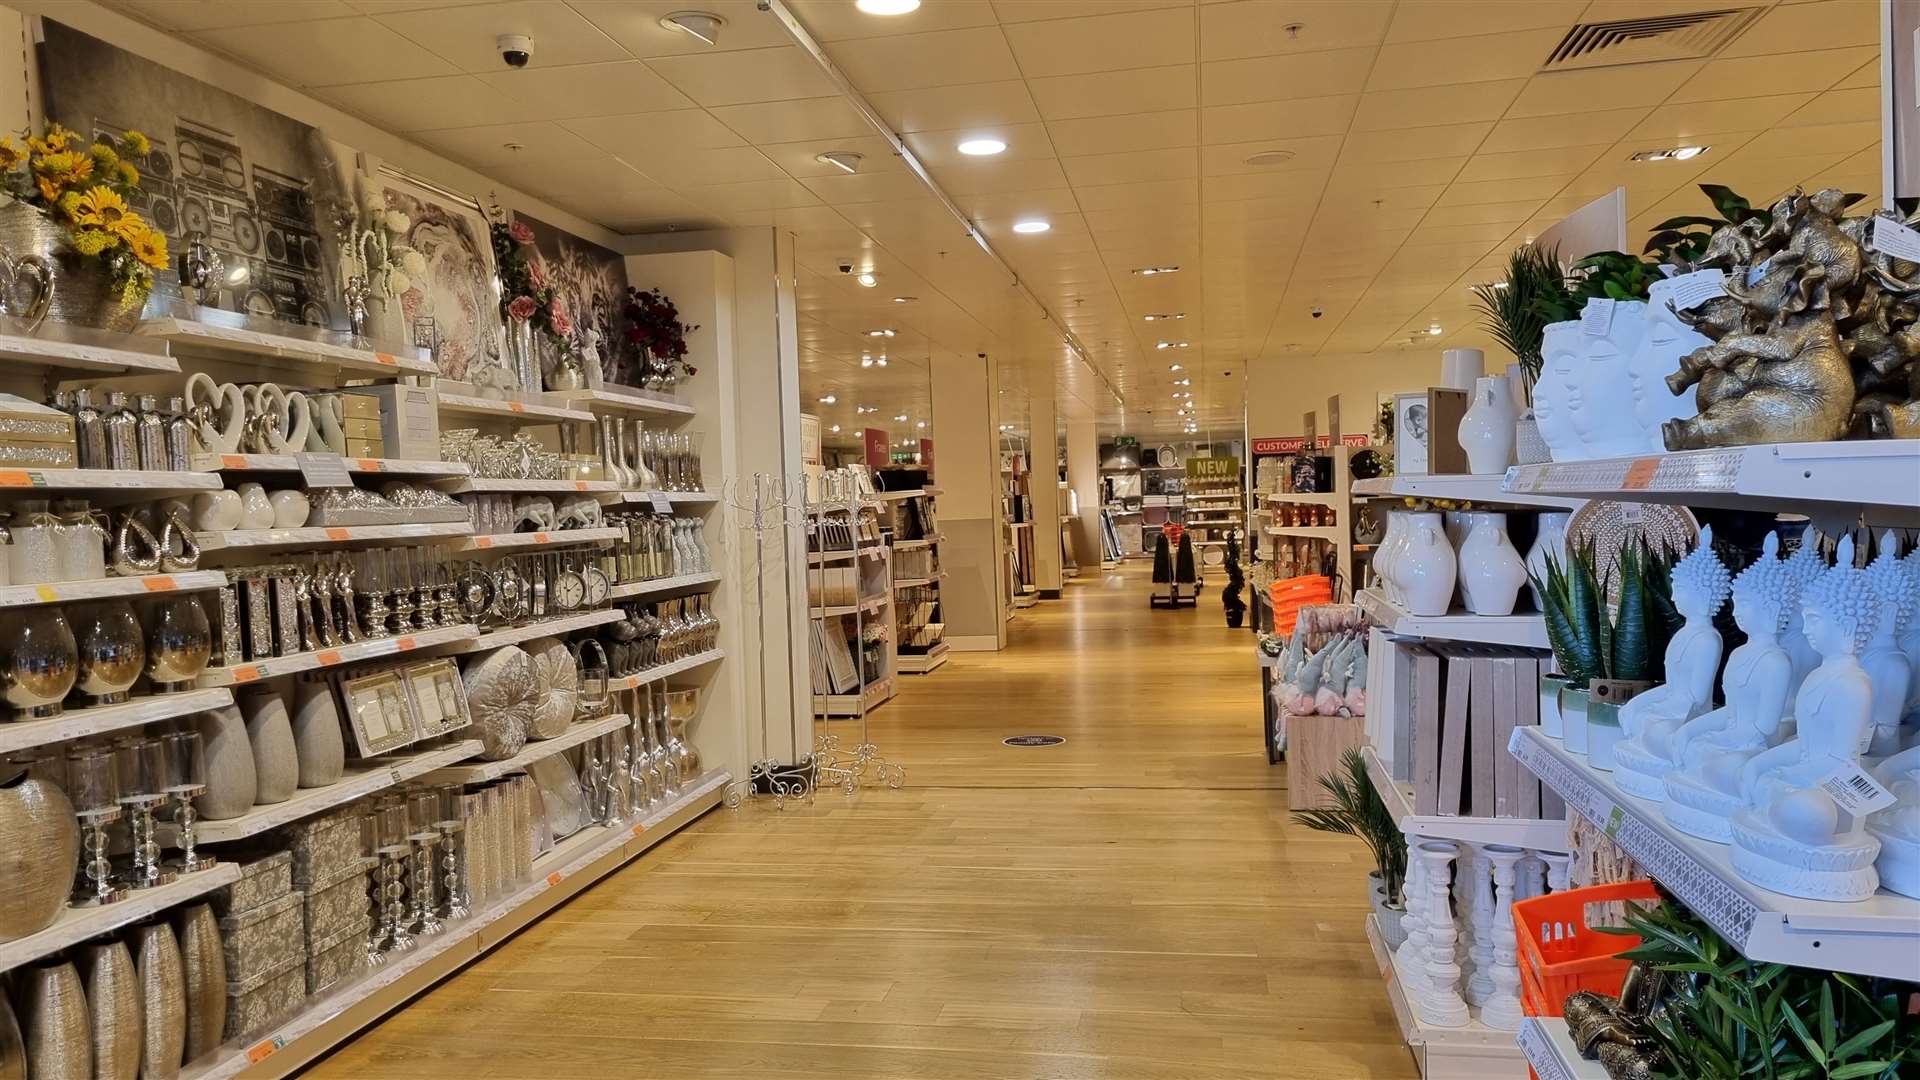 The home decor section